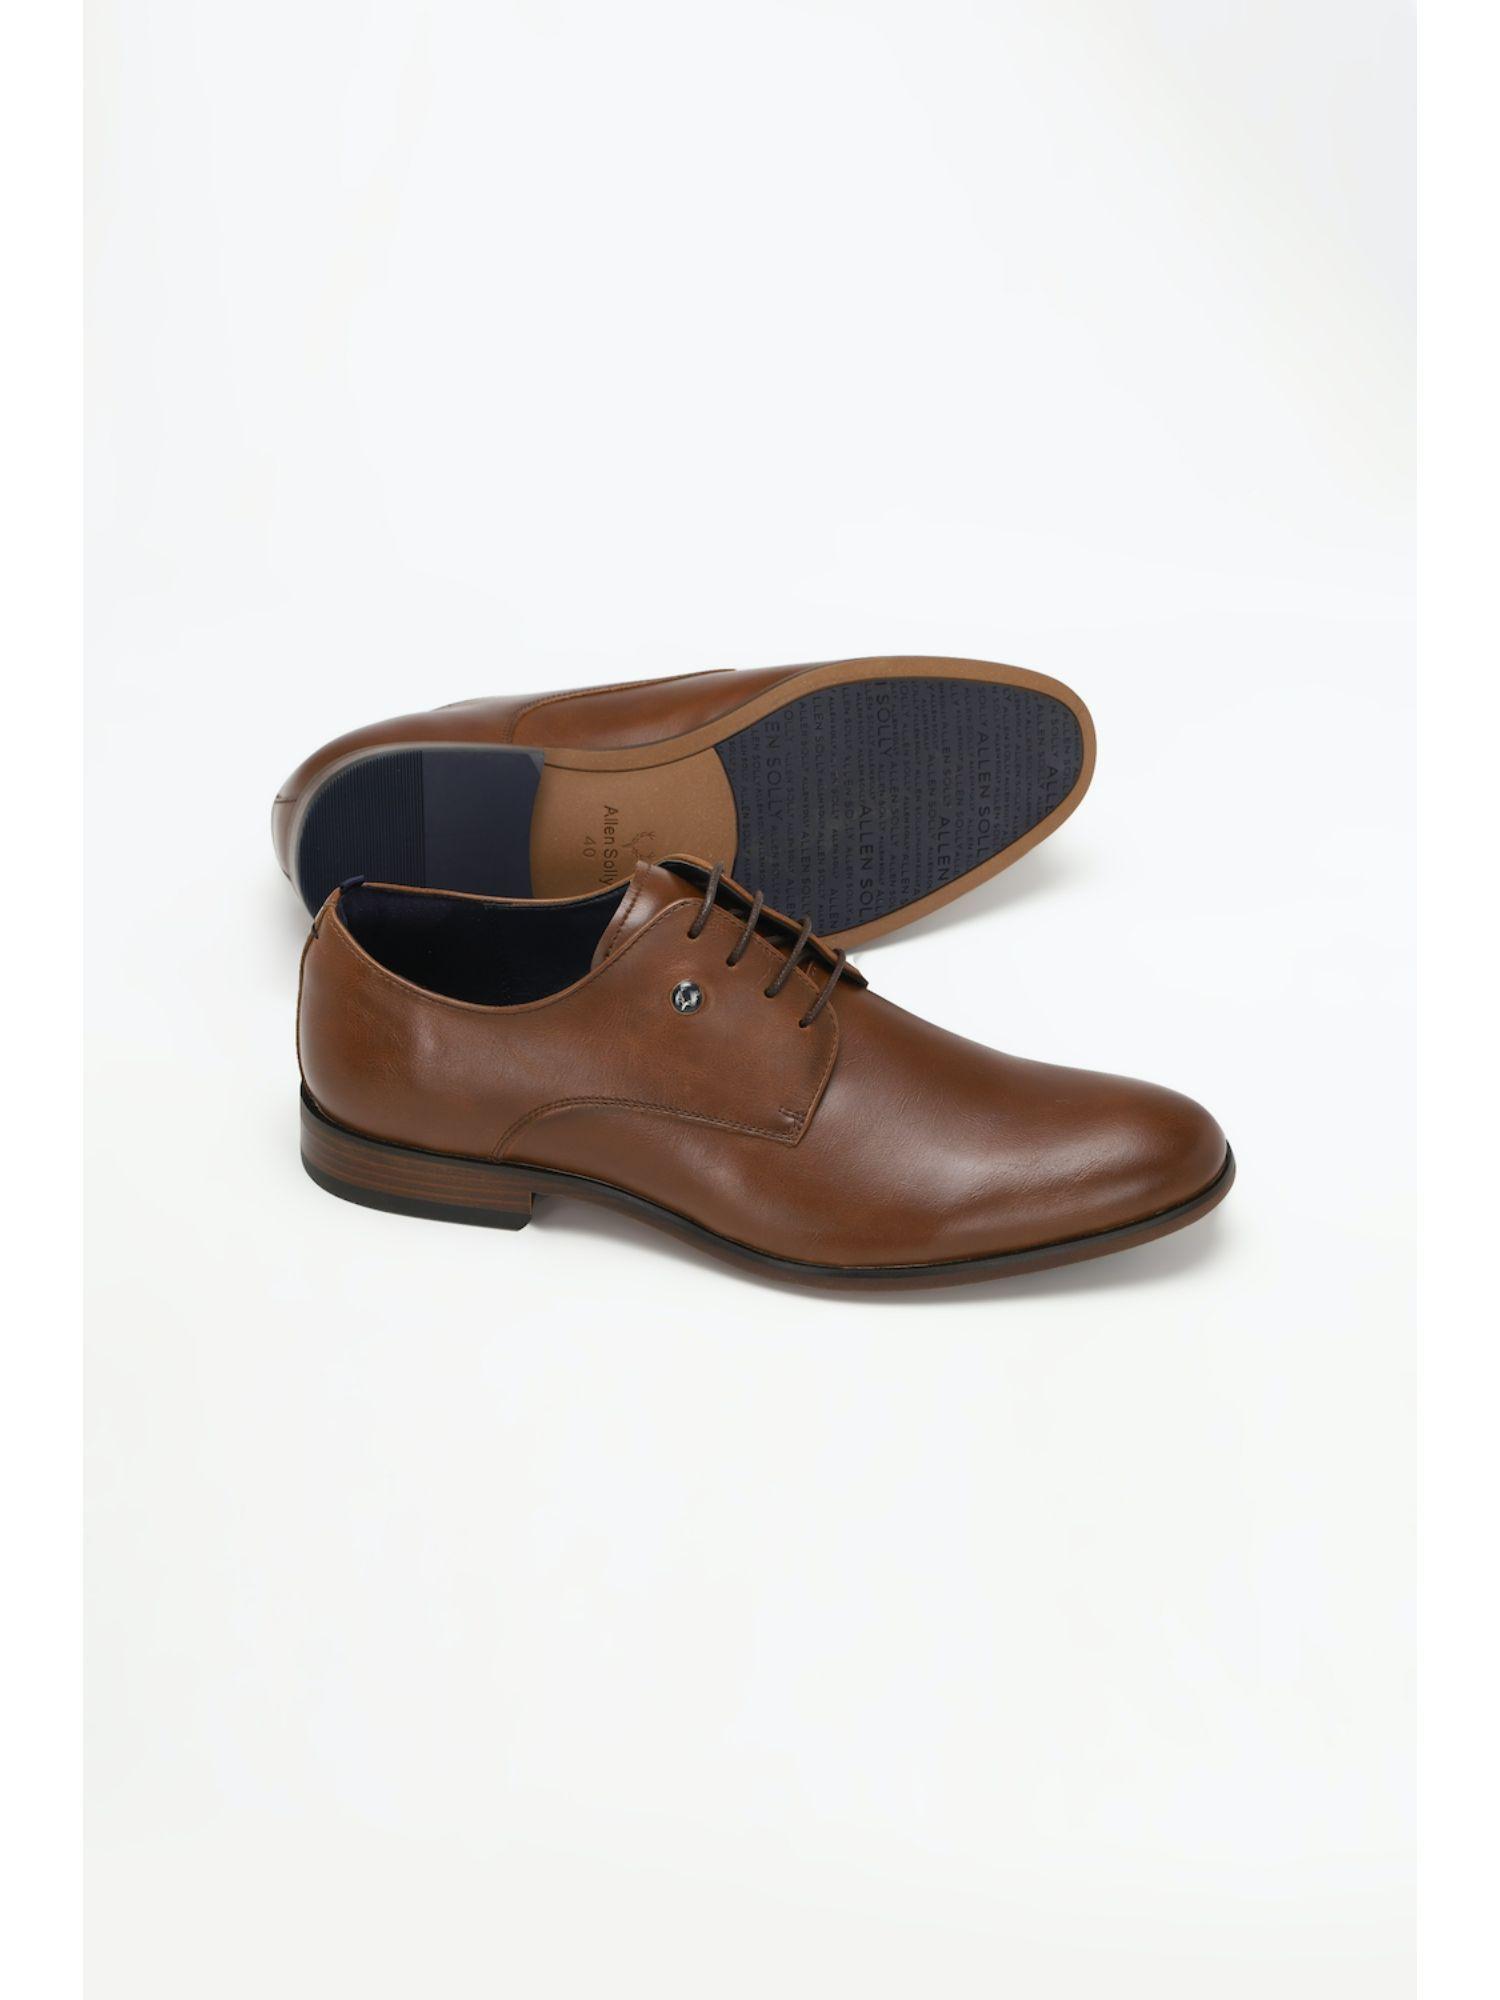 brown-lace-up-shoes